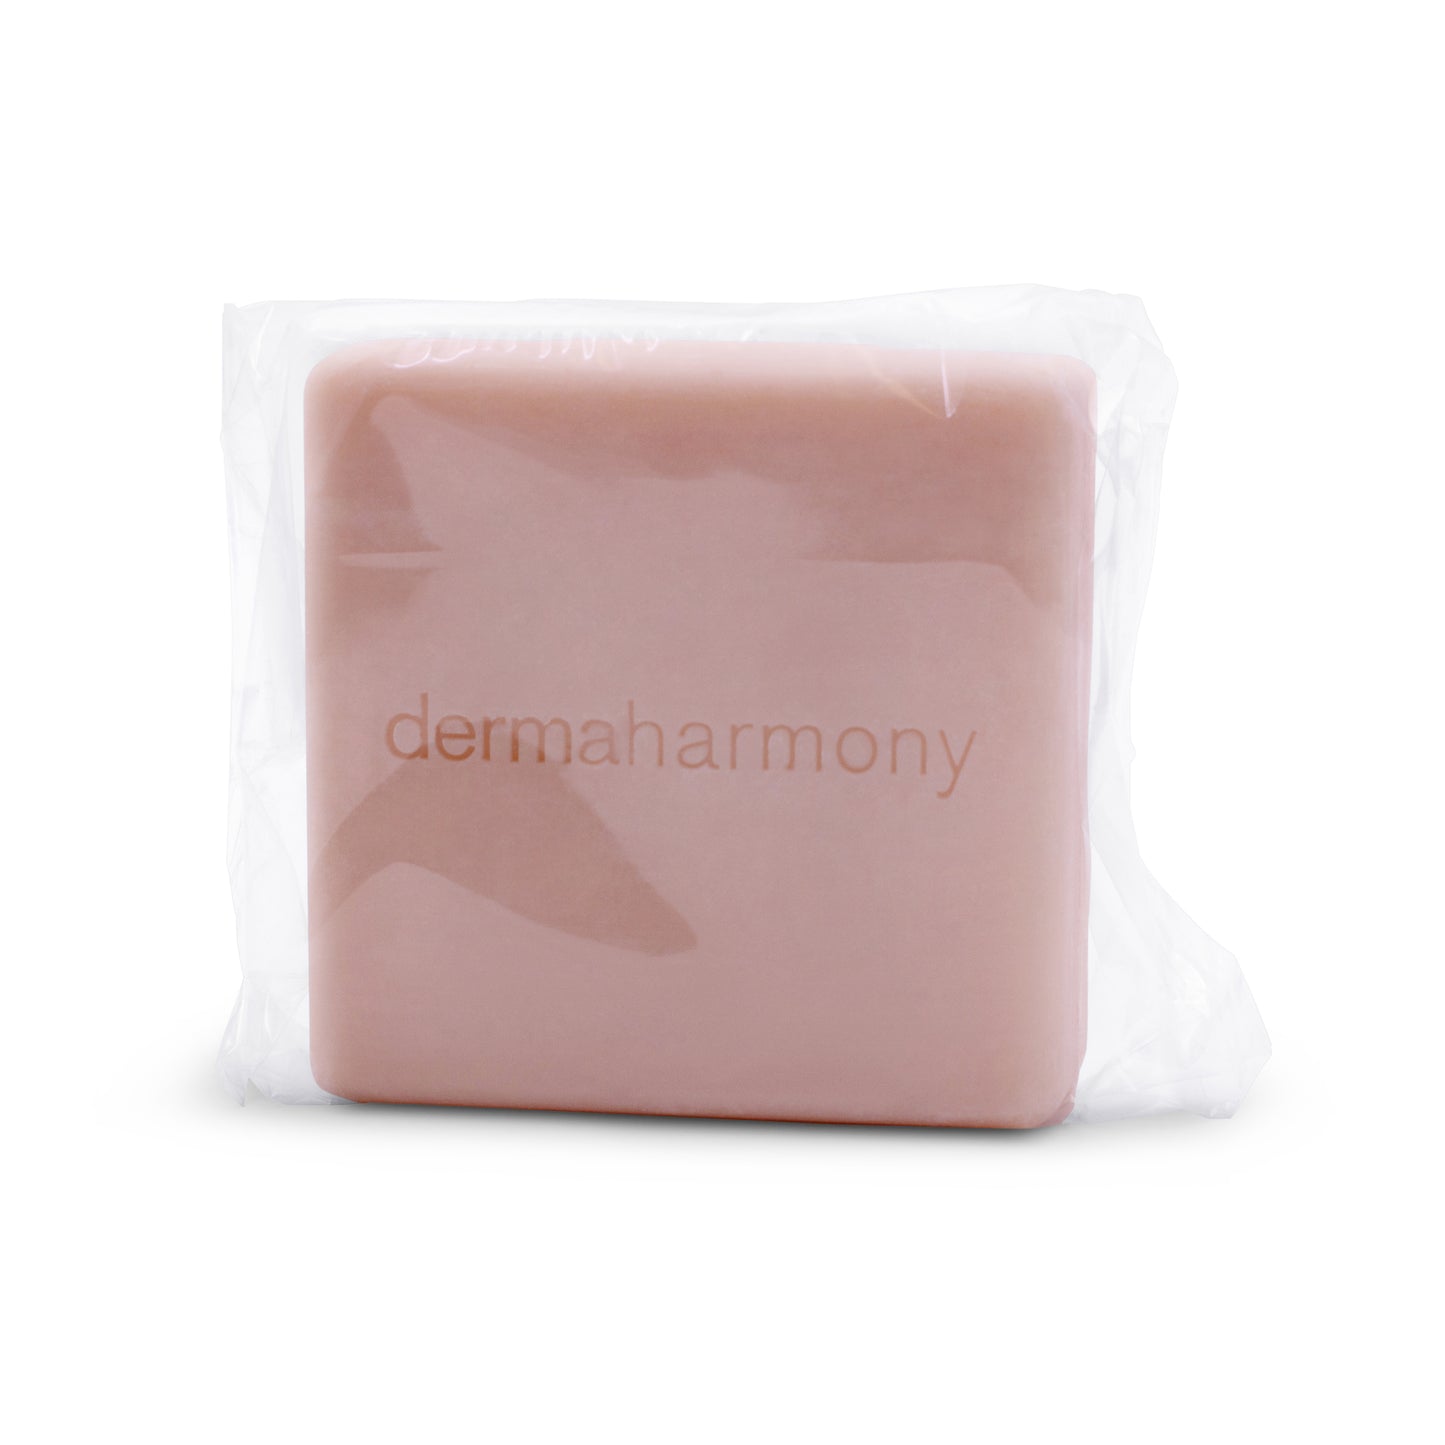 5% Benzoyl Peroxide Cleansing Bar (non-soap) - Unscented